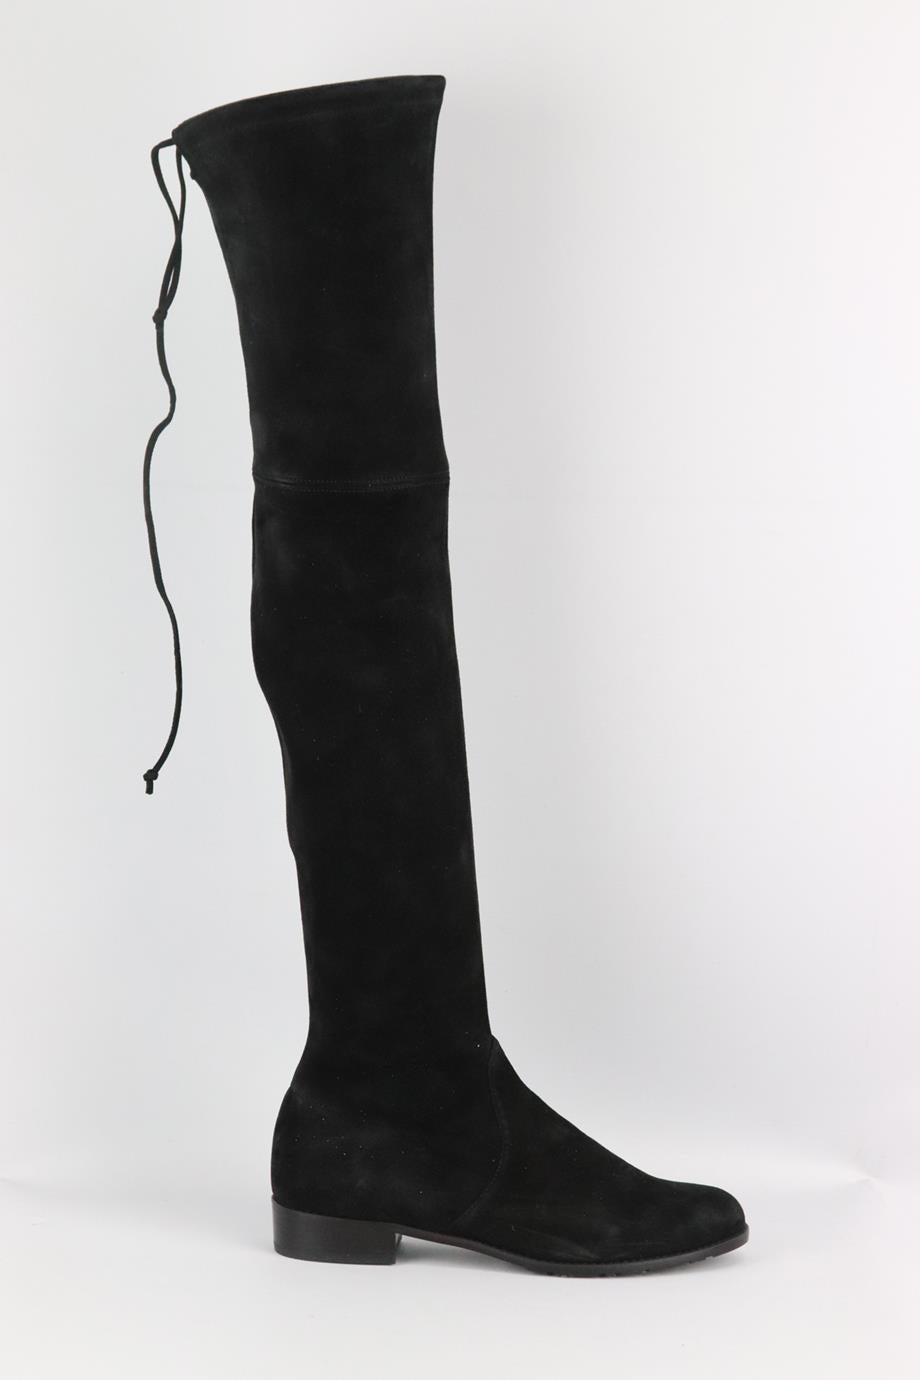 Stuart Weitzman stretch suede over the knee boots. Black. Pull on. Does not come with dustbag and box. Size: EU 38.5 (UK 5.5, US 8.5). Outersole: 10.5 in. Shaft: 23.5 in. Heel: 1.1 in. New without box